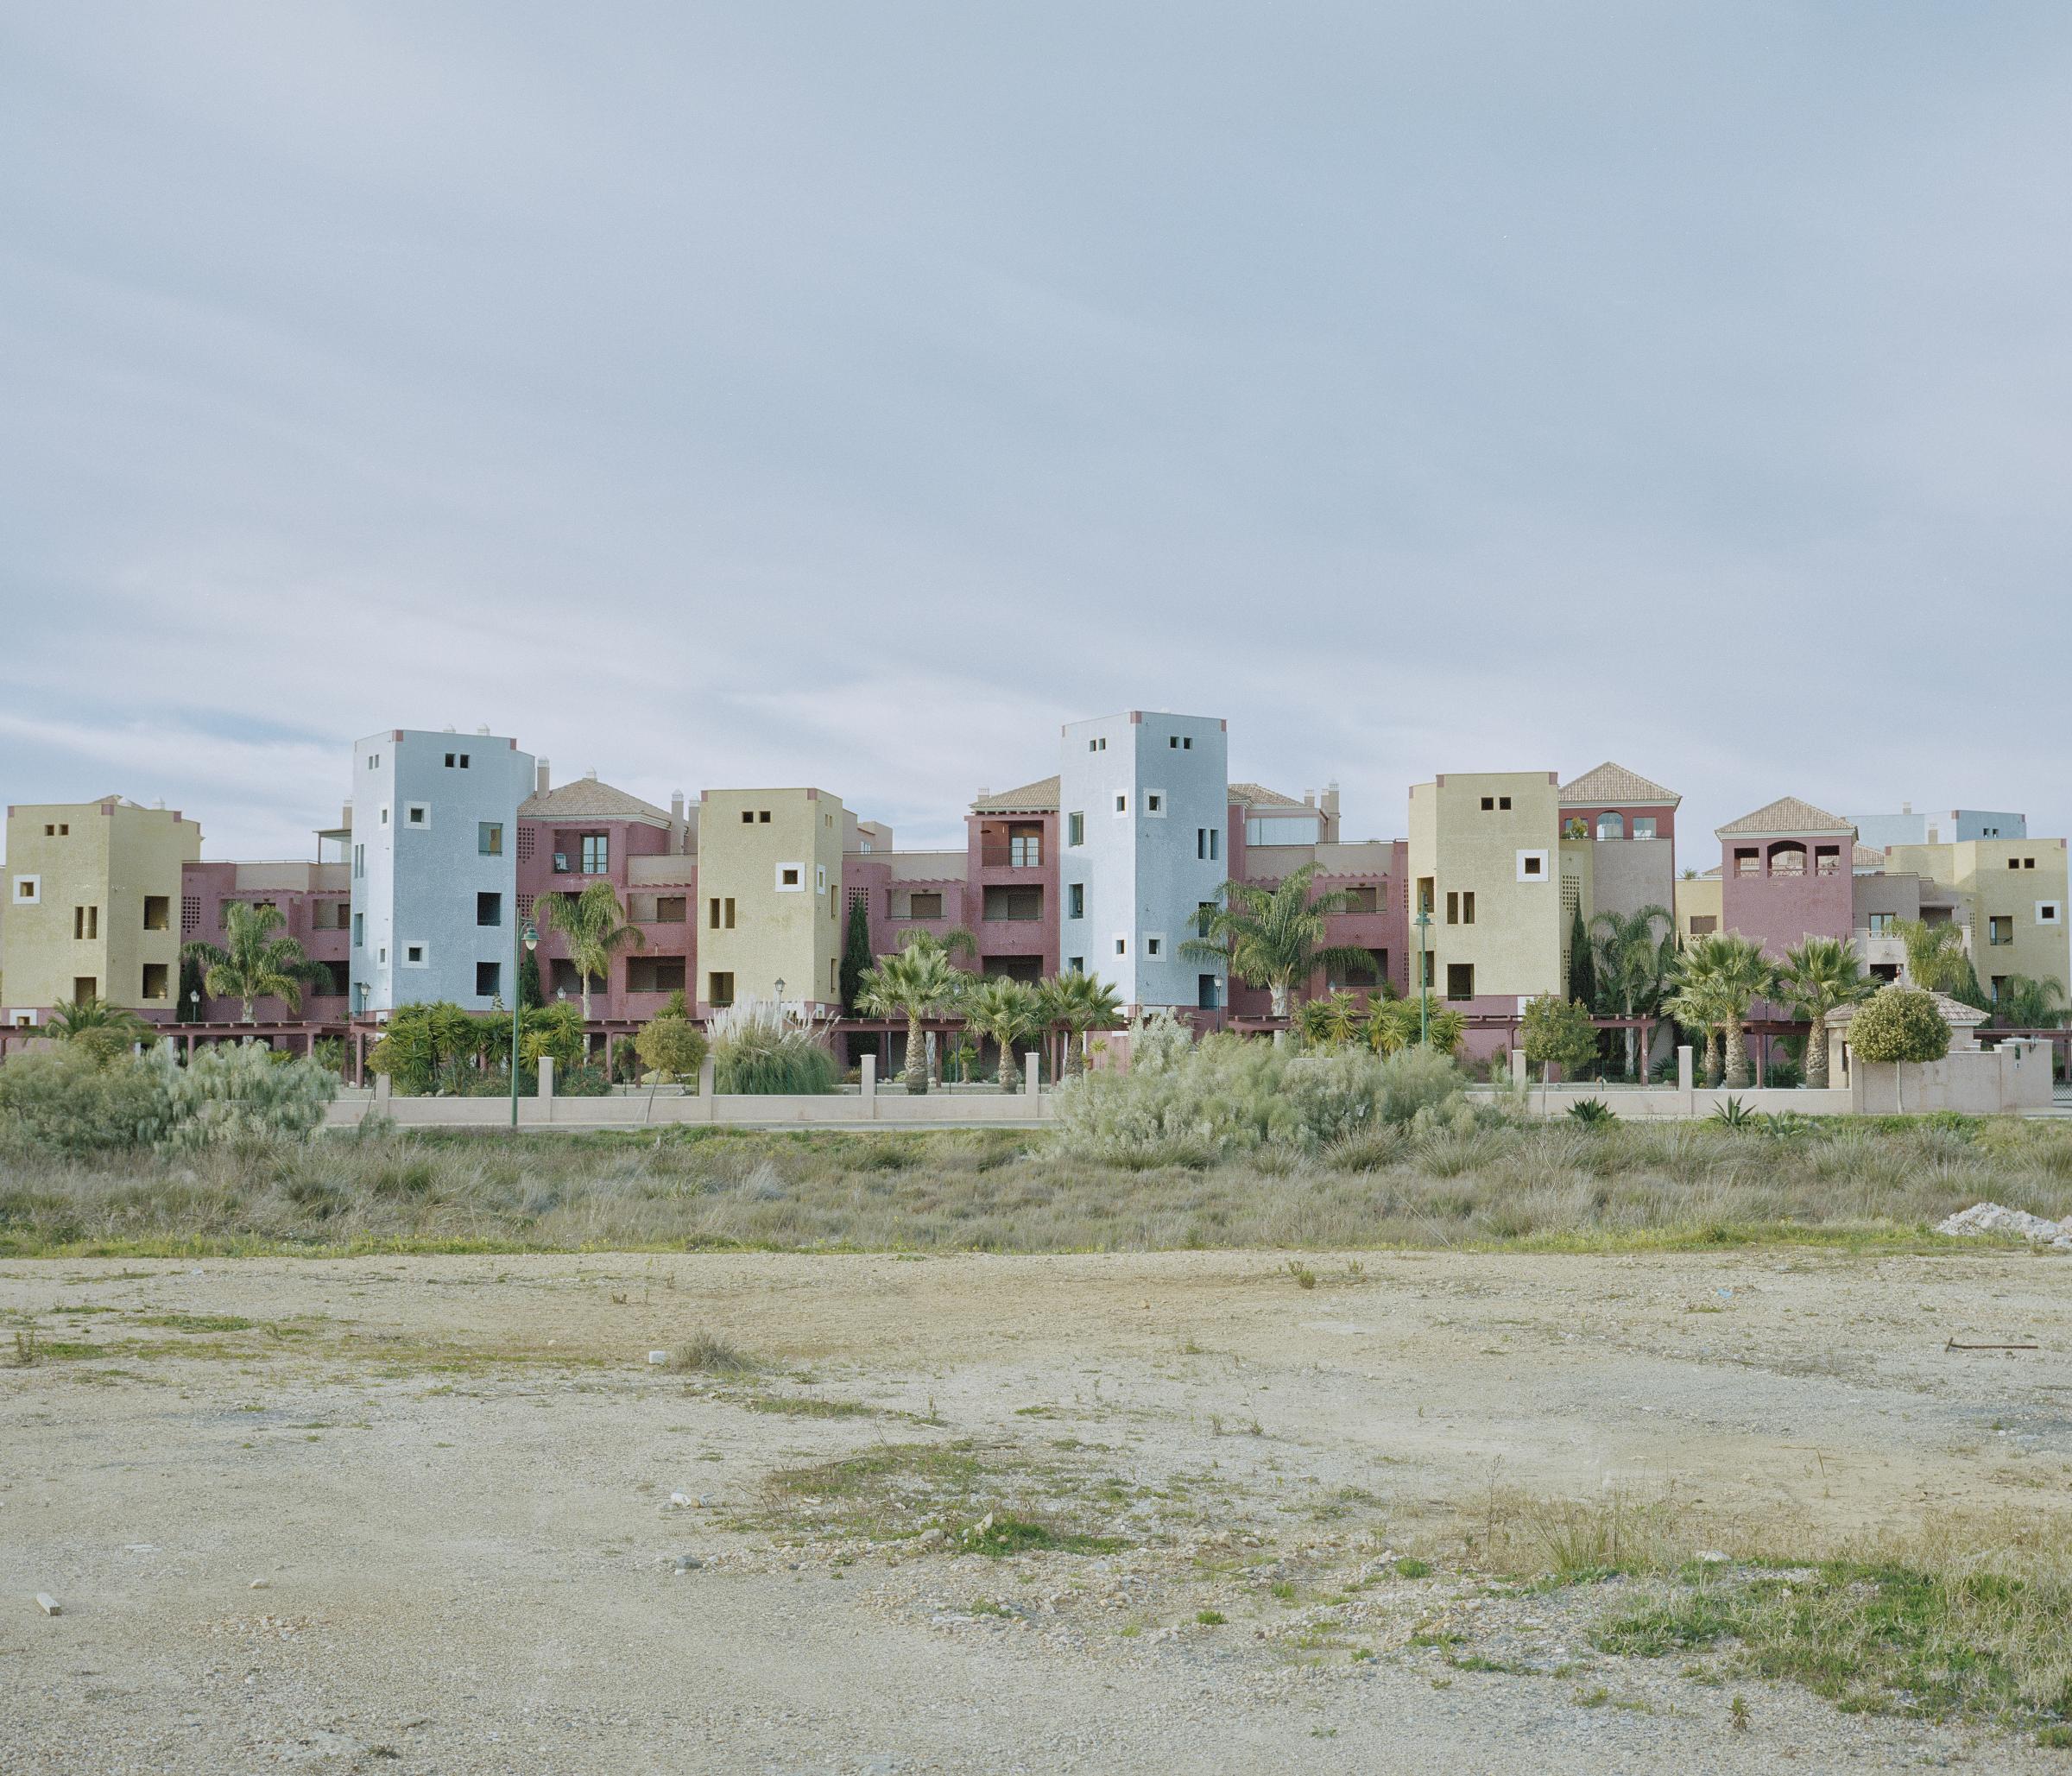 Just a Line - Spain, Ayamonte. Buildings on a beach of Ayamonte. Before...